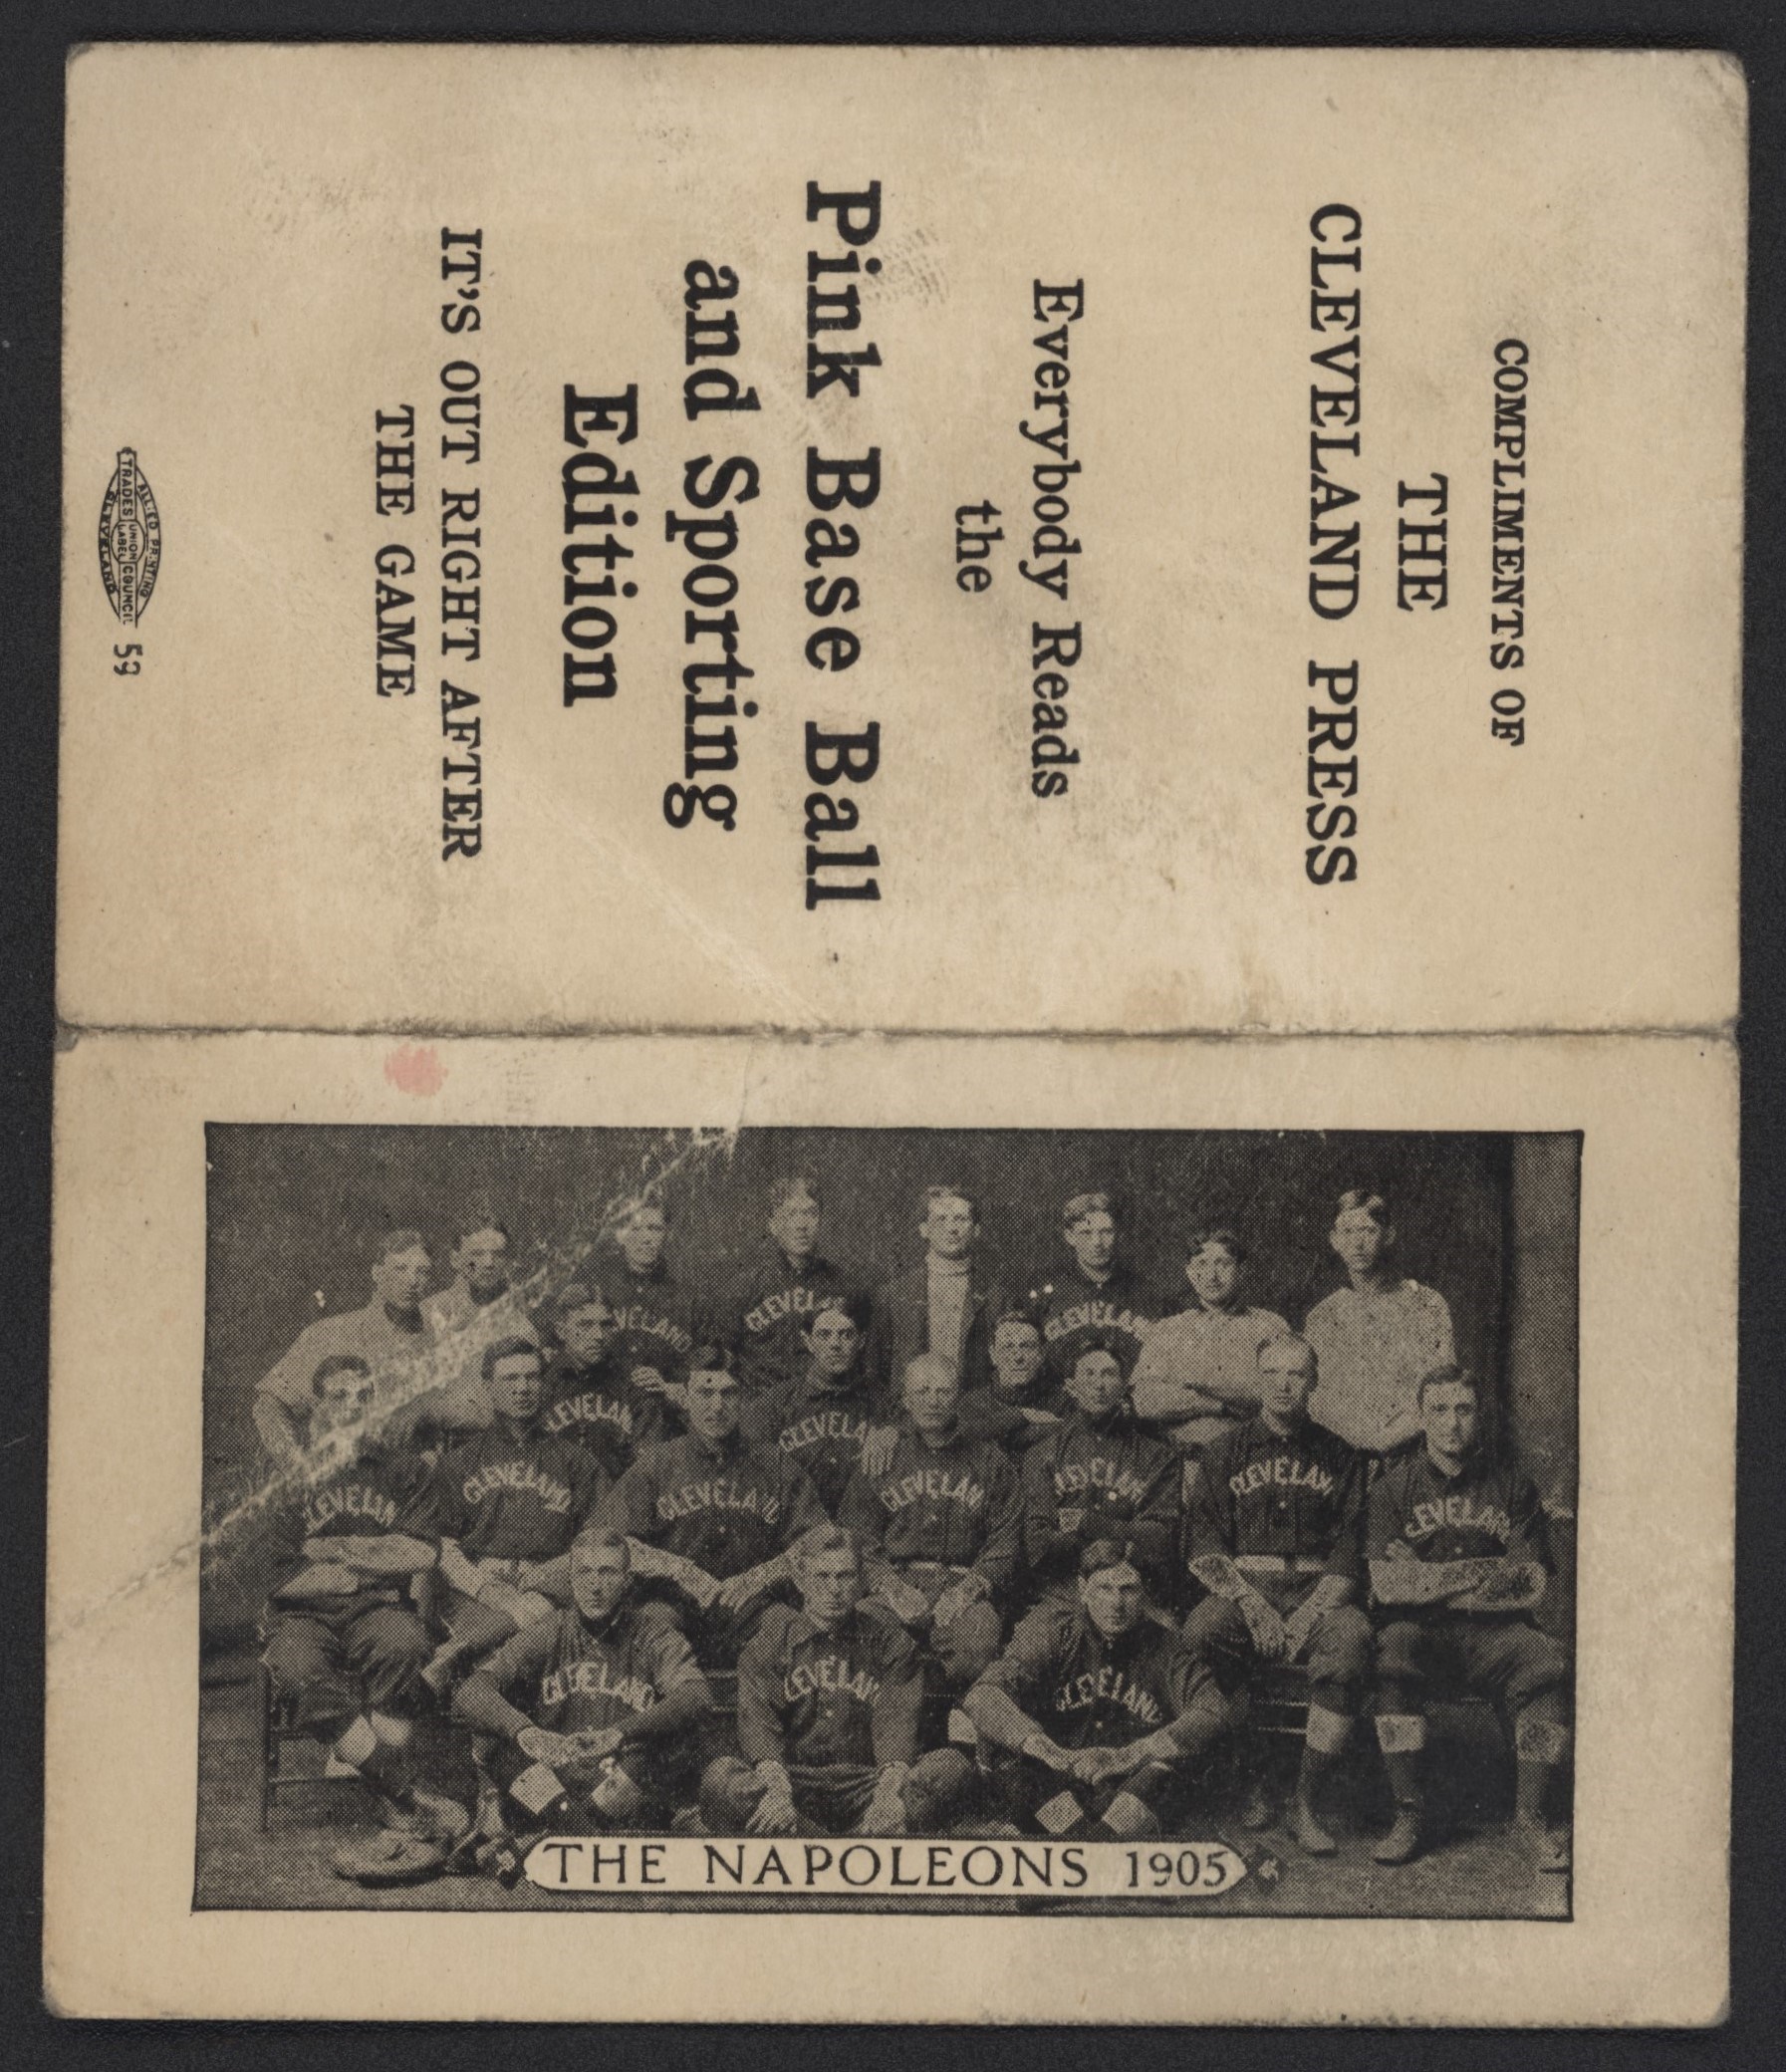 - 1905 "The Napoleons" Schedule with Lajoie and Joss